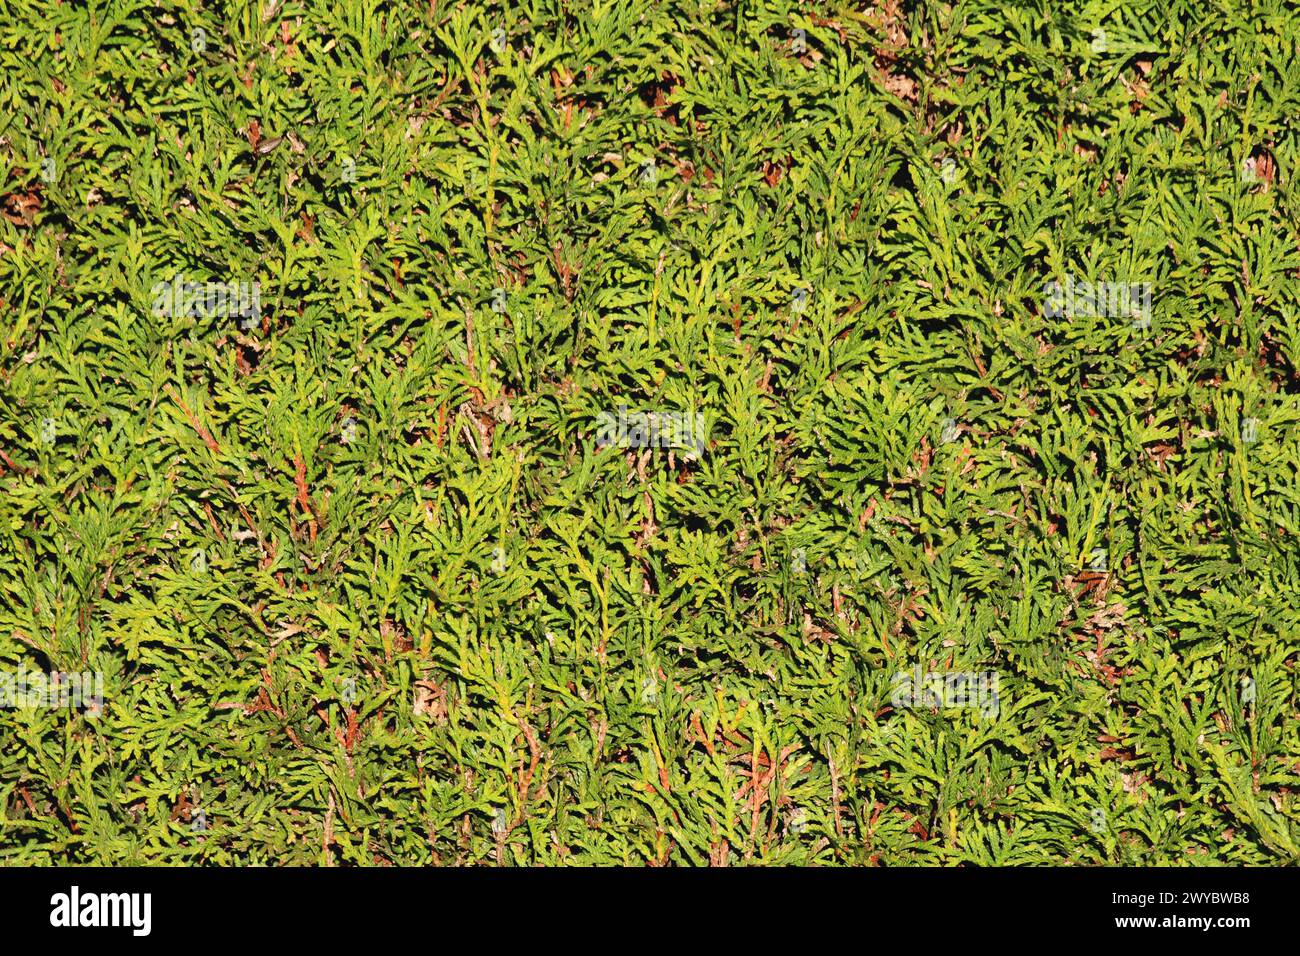 Closeup of Cypress or Cupressus evergreen trees uncut light to dark green scale like leaves growing in form of hedge on warm sunny spring day Stock Photo